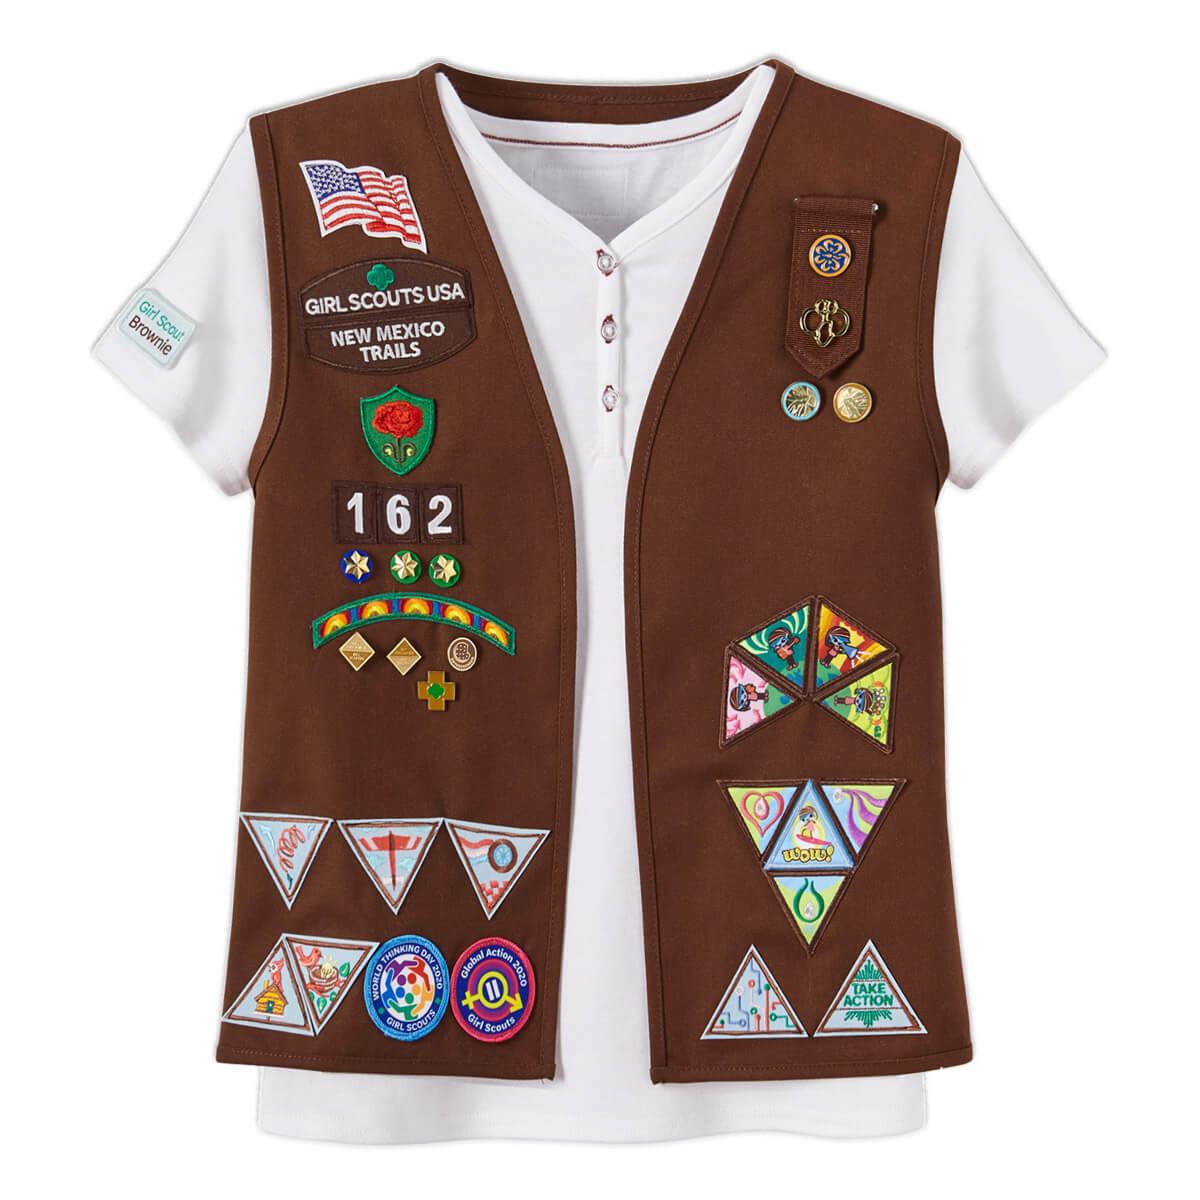 Promo Girl Scouts Brownie Vest 